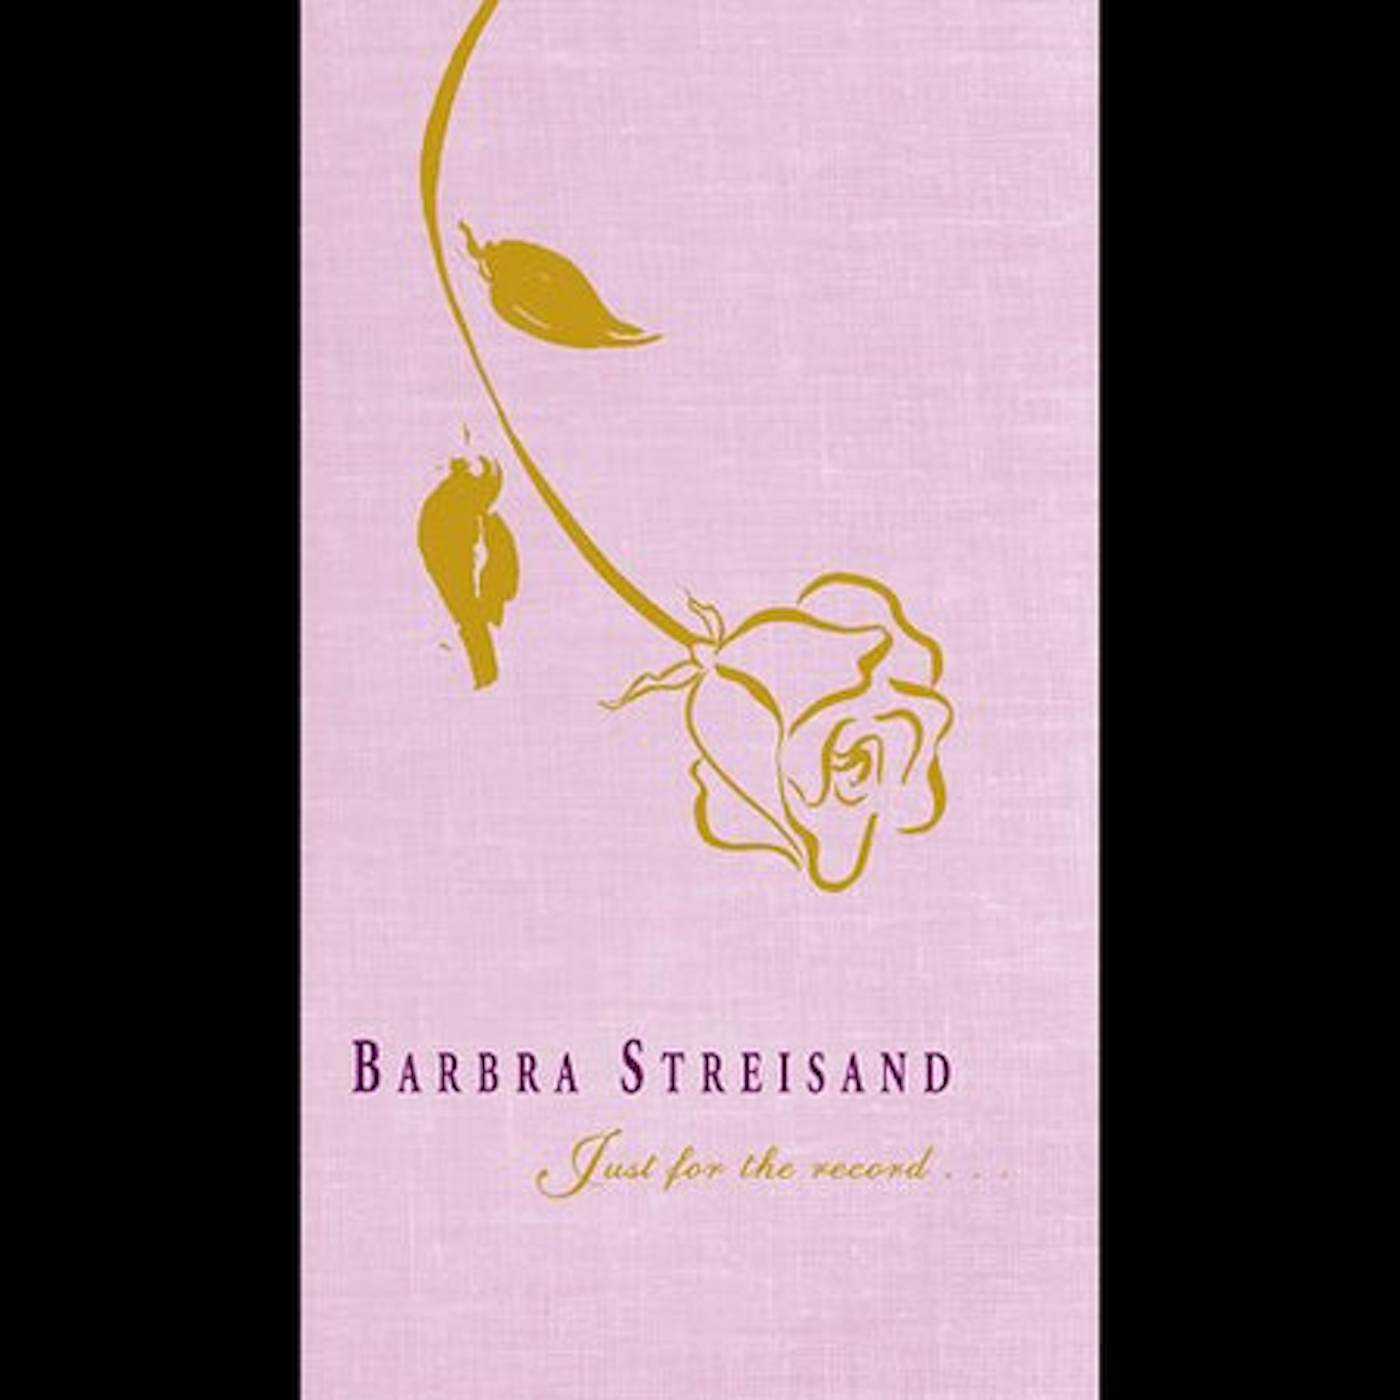 Barbra Streisand JUST FOR THE RECORD (DISPLAY BOX) CD